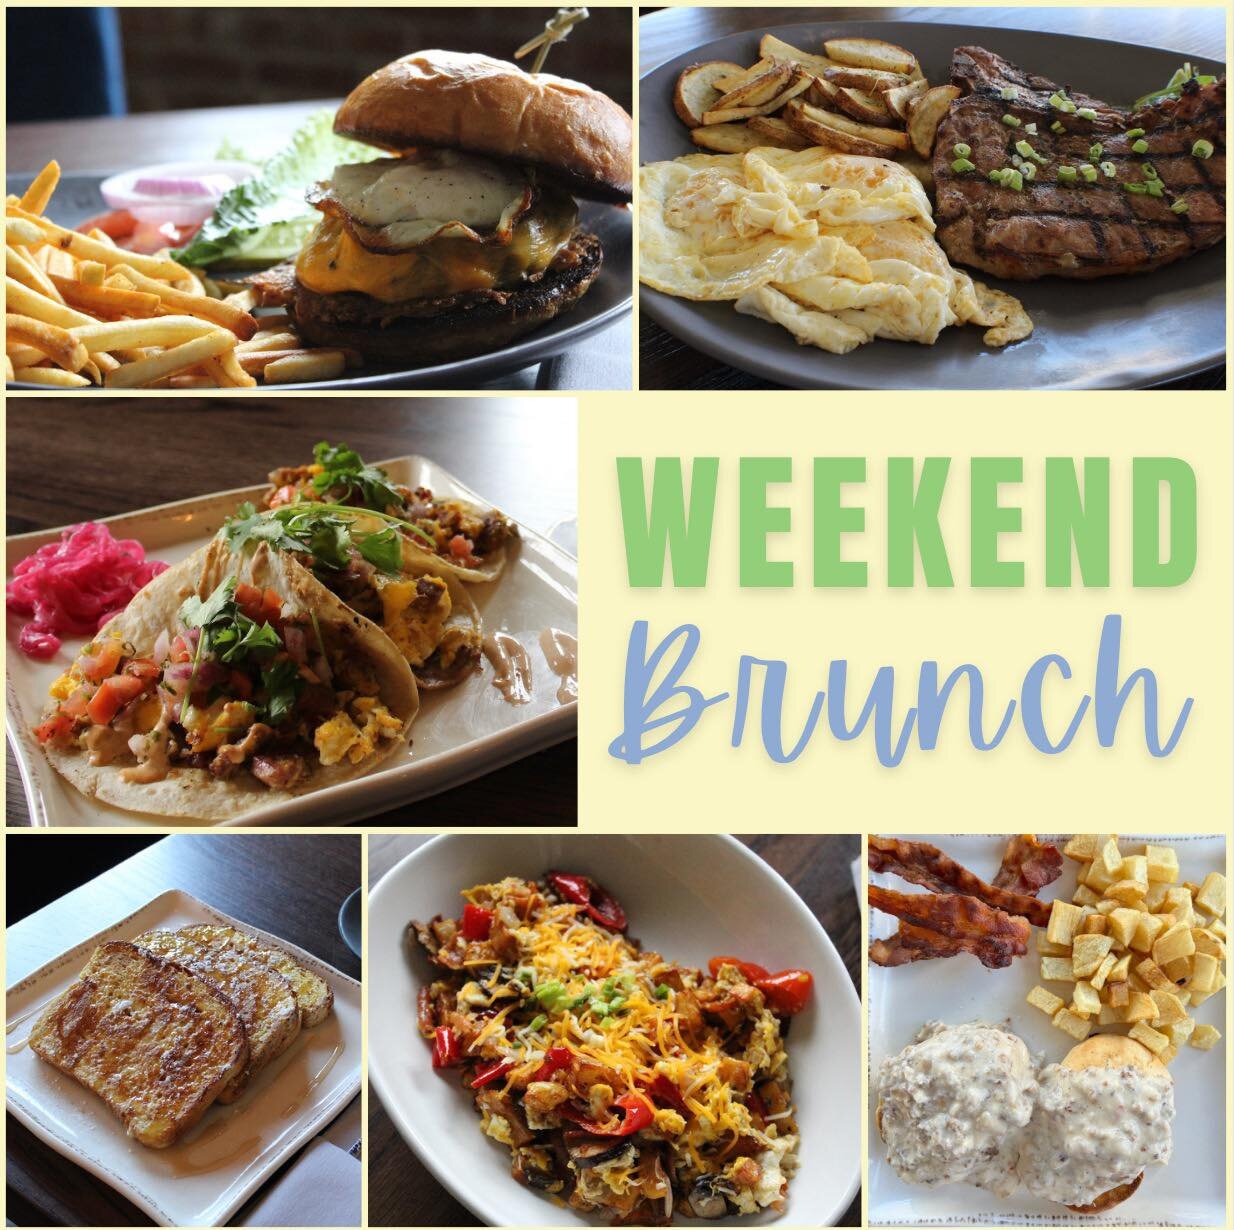 Join us this weekend for a delightful brunch experience at Powerhouse Social! 🌟🥞 Our menu features a delicious selection of dishes from 11am to 3pm on both Saturday and Sunday. Pair your meal with refreshing mimosas and handcrafted cocktails. 🍹🍾 